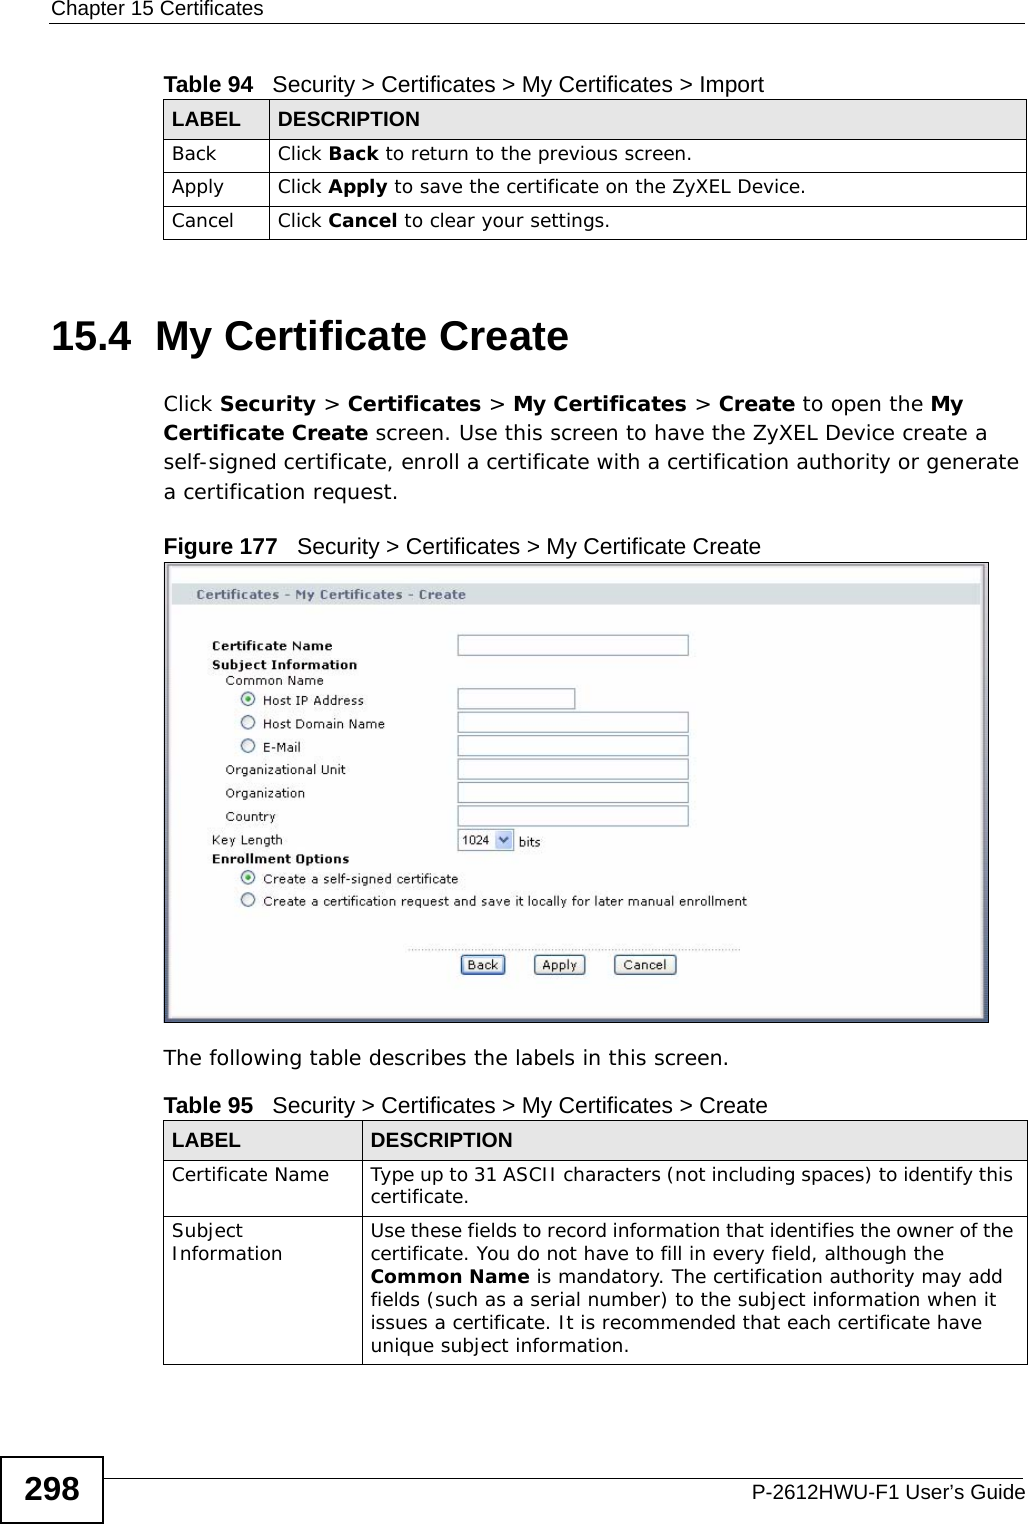 Chapter 15 CertificatesP-2612HWU-F1 User’s Guide29815.4  My Certificate Create Click Security &gt; Certificates &gt; My Certificates &gt; Create to open the My Certificate Create screen. Use this screen to have the ZyXEL Device create a self-signed certificate, enroll a certificate with a certification authority or generate a certification request.Figure 177   Security &gt; Certificates &gt; My Certificate CreateThe following table describes the labels in this screen. Back Click Back to return to the previous screen.Apply Click Apply to save the certificate on the ZyXEL Device.Cancel Click Cancel to clear your settings.Table 94   Security &gt; Certificates &gt; My Certificates &gt; ImportLABEL DESCRIPTIONTable 95   Security &gt; Certificates &gt; My Certificates &gt; CreateLABEL DESCRIPTIONCertificate Name Type up to 31 ASCII characters (not including spaces) to identify this certificate. Subject Information Use these fields to record information that identifies the owner of the certificate. You do not have to fill in every field, although the Common Name is mandatory. The certification authority may add fields (such as a serial number) to the subject information when it issues a certificate. It is recommended that each certificate have unique subject information.